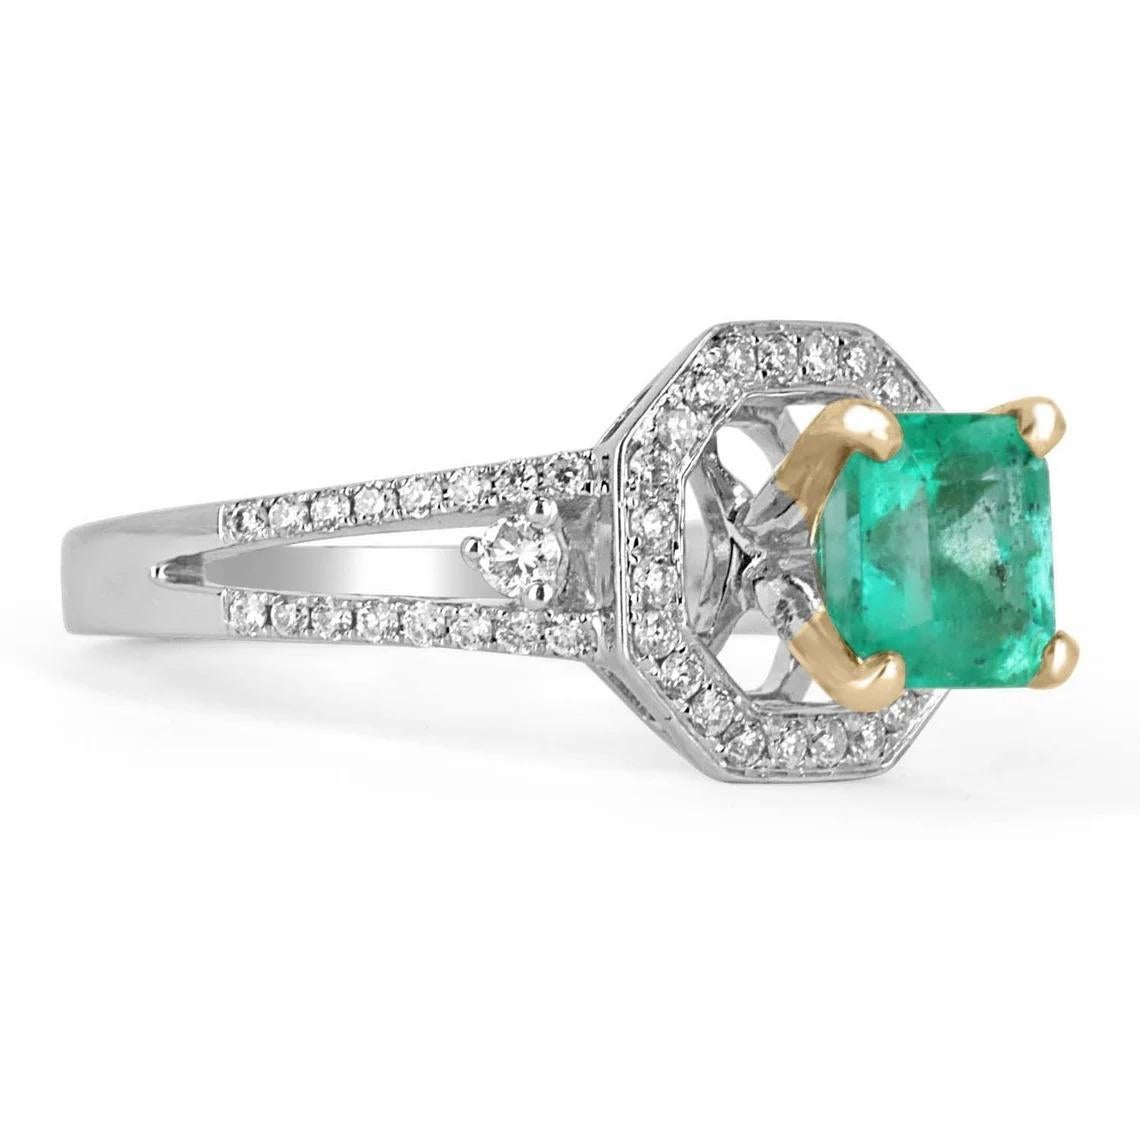 Showcased is a natural emerald and diamond modern engagement ring. This ring features a bright-hued Asscher cut emerald from Colombian mines. The emerald is set in a fashionable, elevated halo-styled setting. Pave white natural diamonds accent the